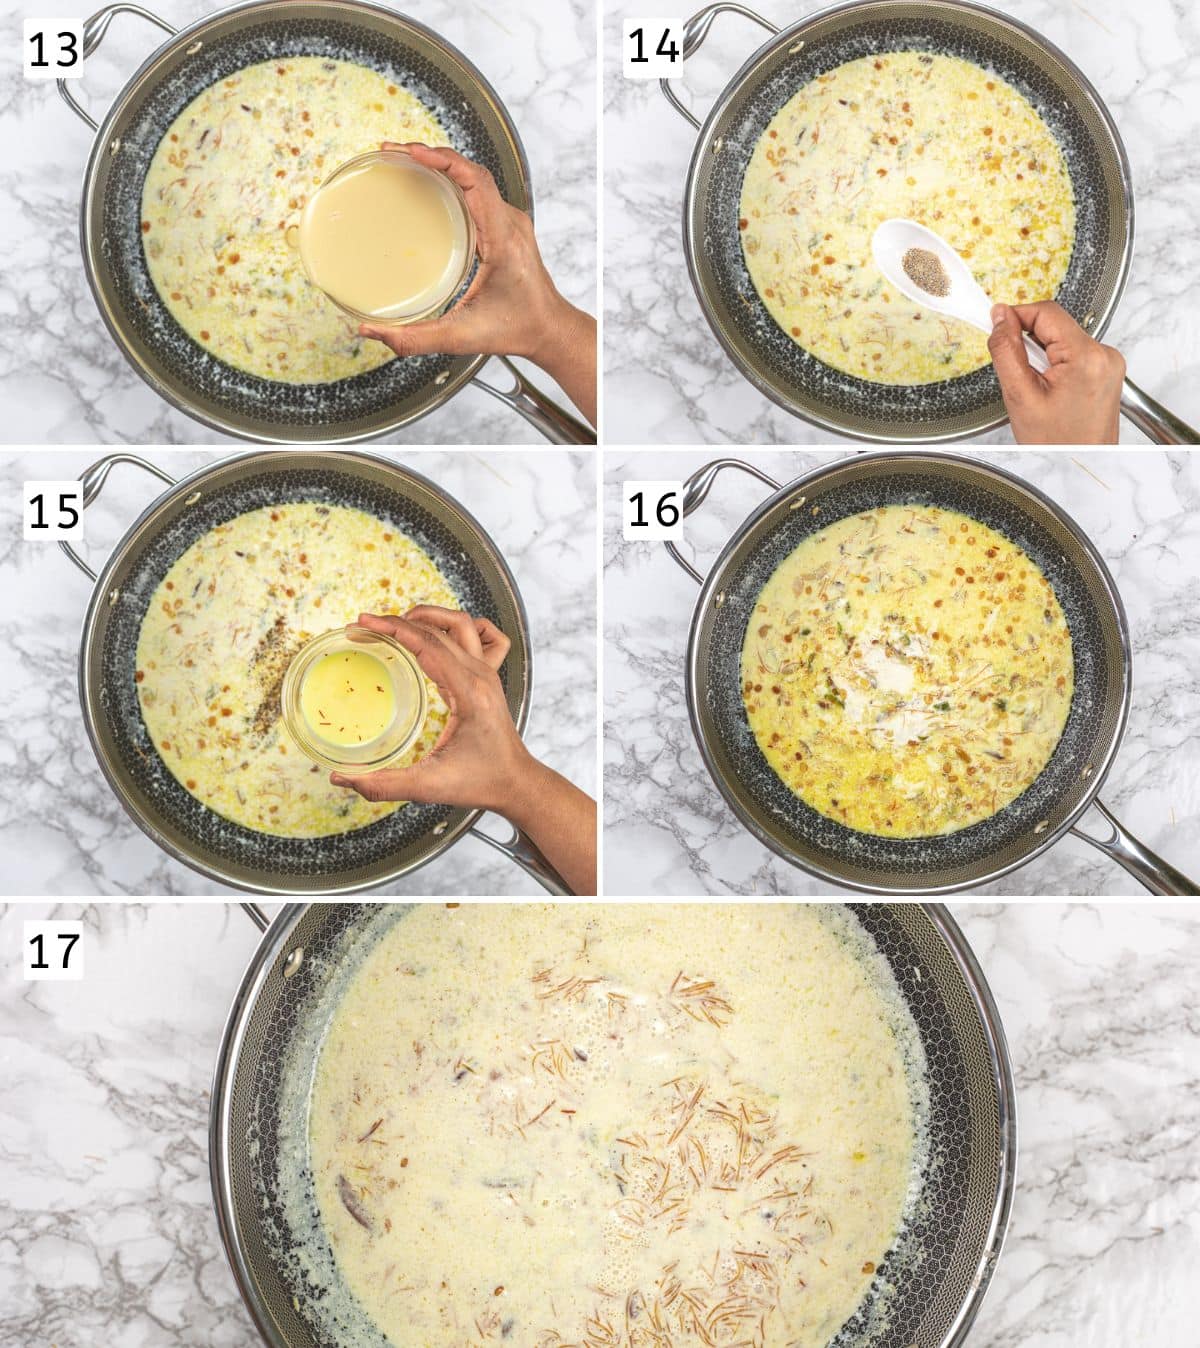 Collage of 5 images showing adding condensed milk, cardamom, saffron milk and simmering.